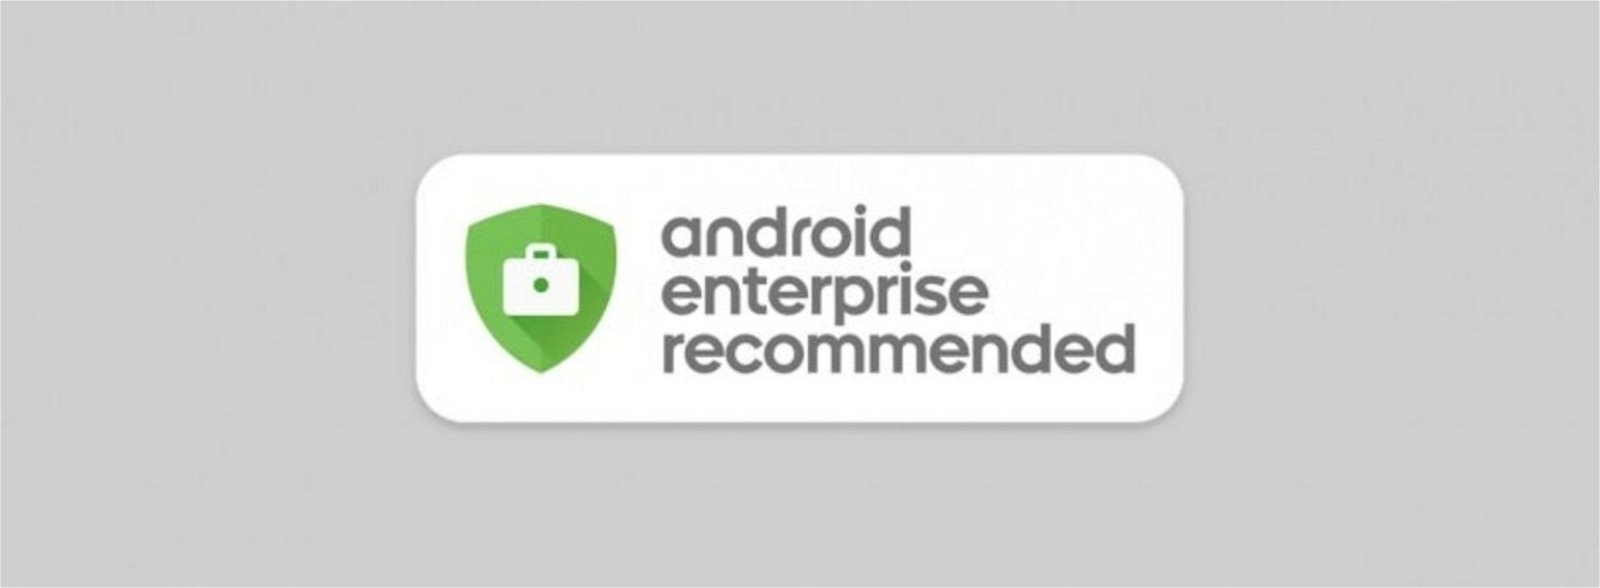 Sello Android Enterprise Recommended